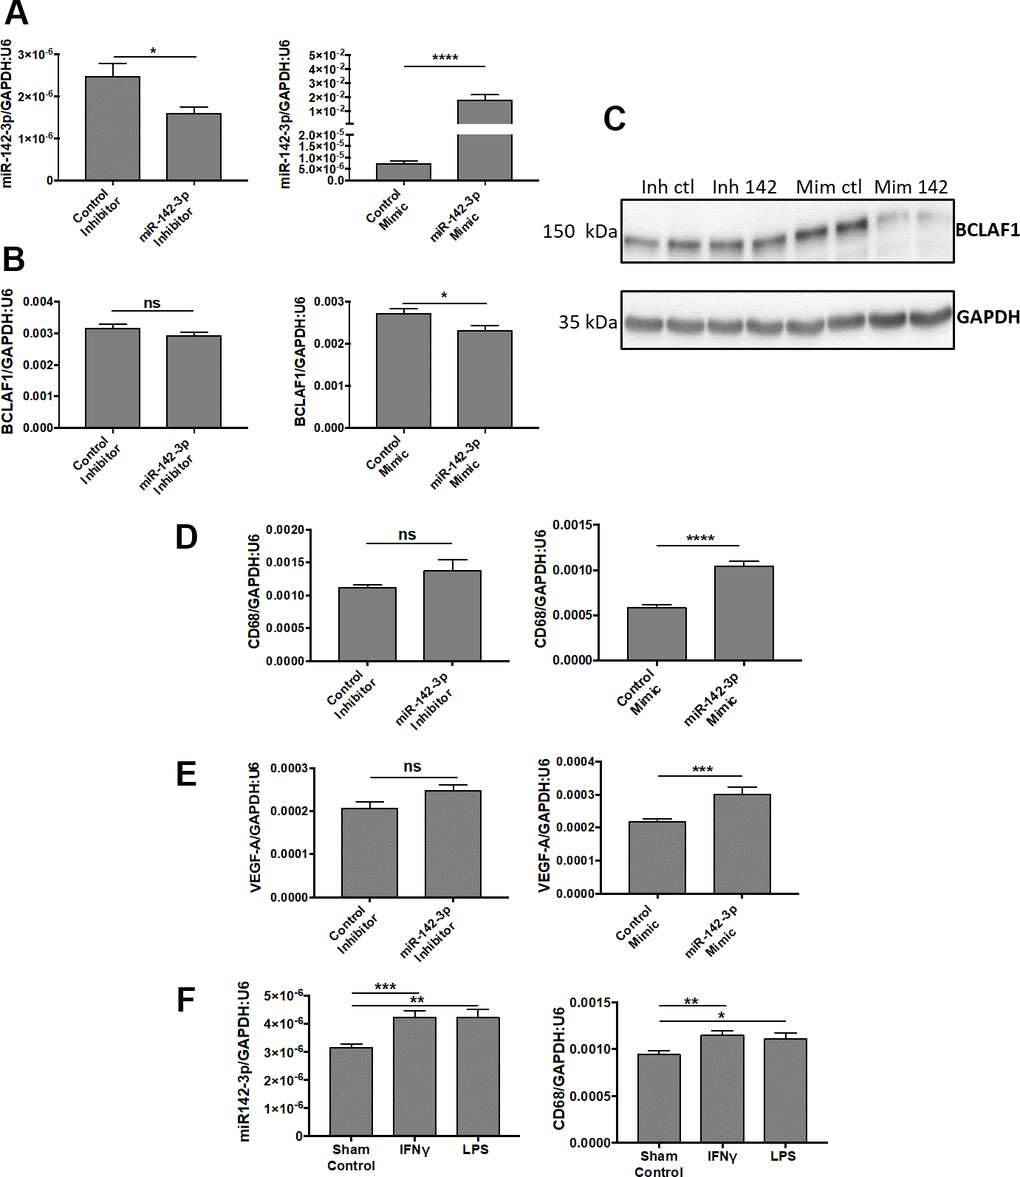 MiR-142-3p regulates the activation of human microglia cells under pro-inflammatory conditions. (A–C) Transfections of miR-142-3p inhibitor and mimic lead to decreased and increased miR-142-3p level, respectively (A). Transfection of miR-142-3p mimic decreased BCLAF1 levels, a previously identified target of miR-142-3p, both at the transcript level (B) and protein level (C). (D, E) Effects on CD68 level (D) or VEGF-A (E) in HMC3 transfected with miR-142-3p inhibitor or mimic and relative controls. Only miR-142-3p mimic was able to induce CD68 et VEGF-A production. (F) HMC3 stimulated with either IFNᵞ or LPS for 24 hours overexpress miR-142-3p as long with CD68. All qRT-PCR results are presented as mean +- SEM. Mann Whitney test. (* = p ≤ 0.05; ** = p ≤ 0.01; *** = p ≤ 0.001; **** = p ≤ 0.0001; ns = not significant).